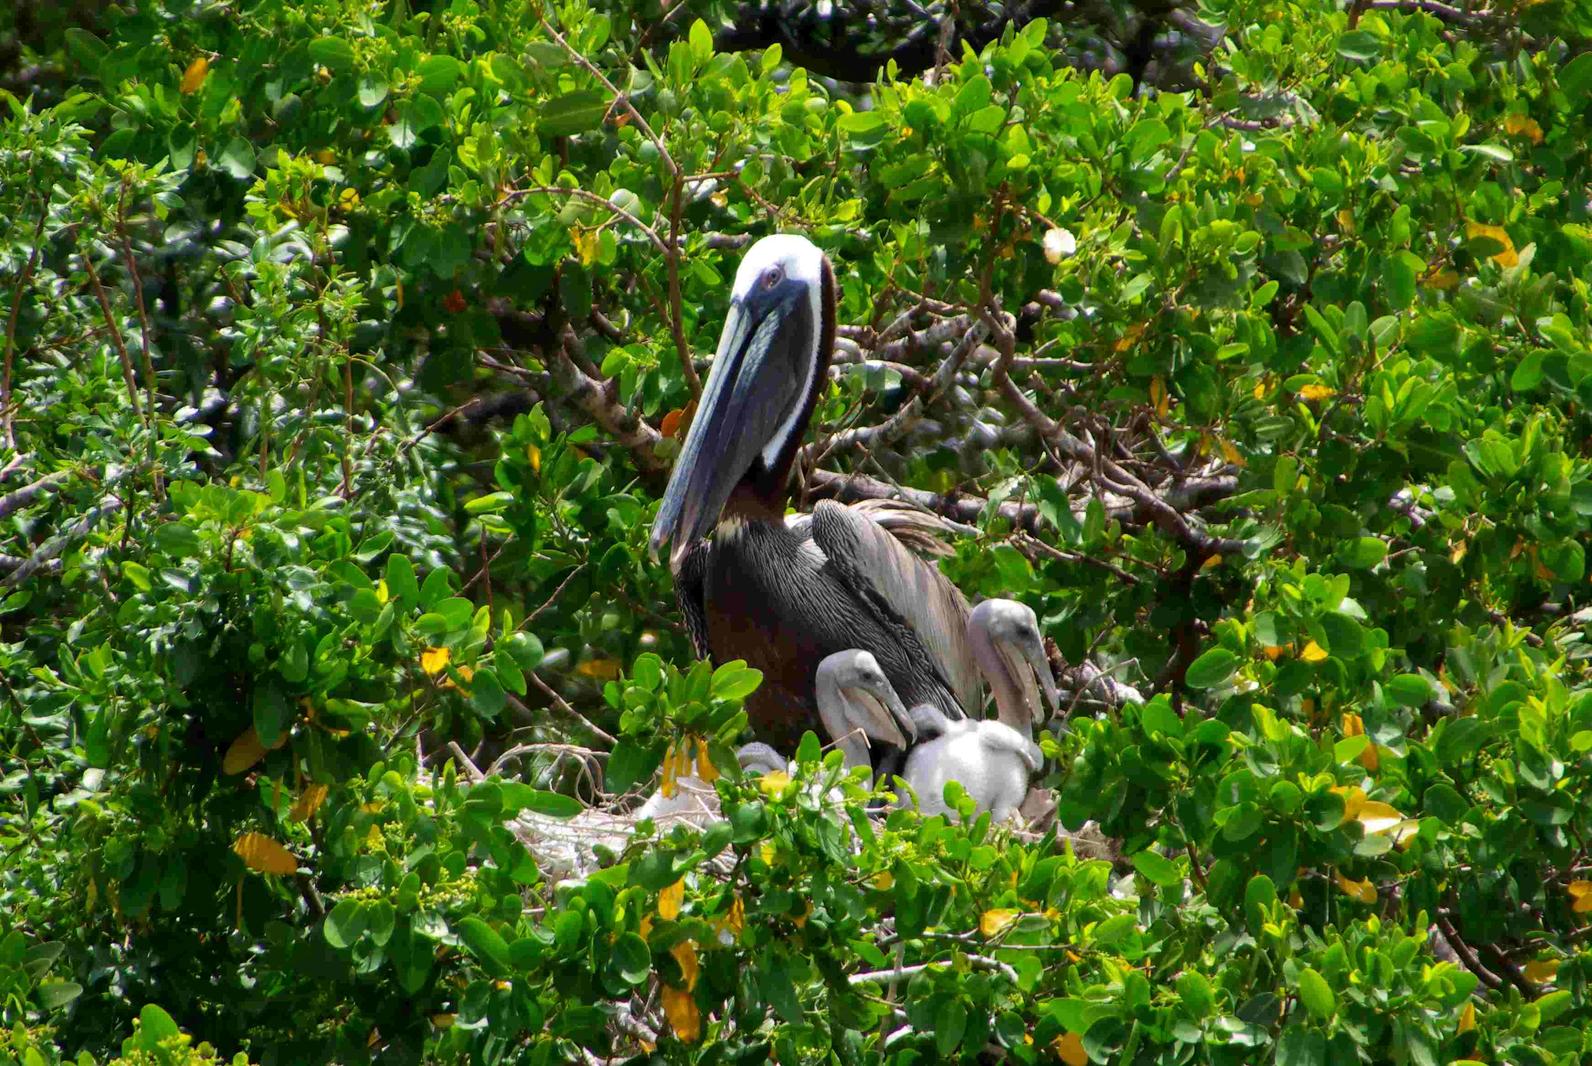 Adult Brown Pelican with chicks